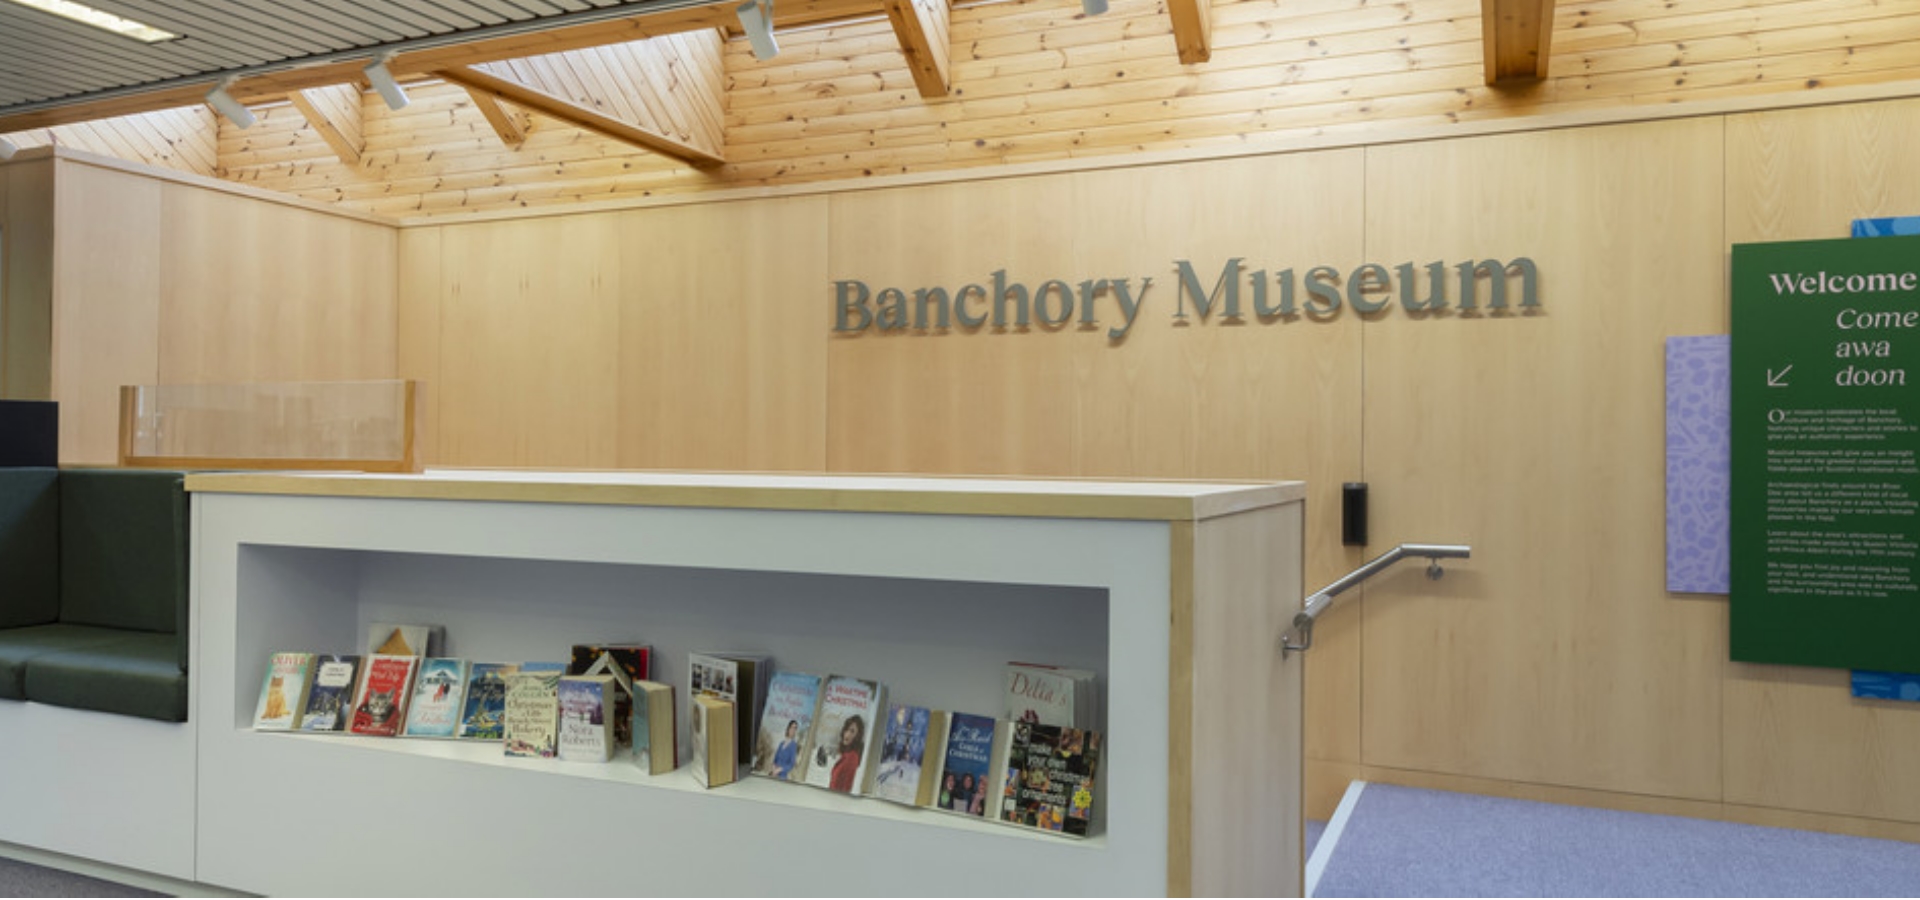 External image of the entrance to Banchory Museum.